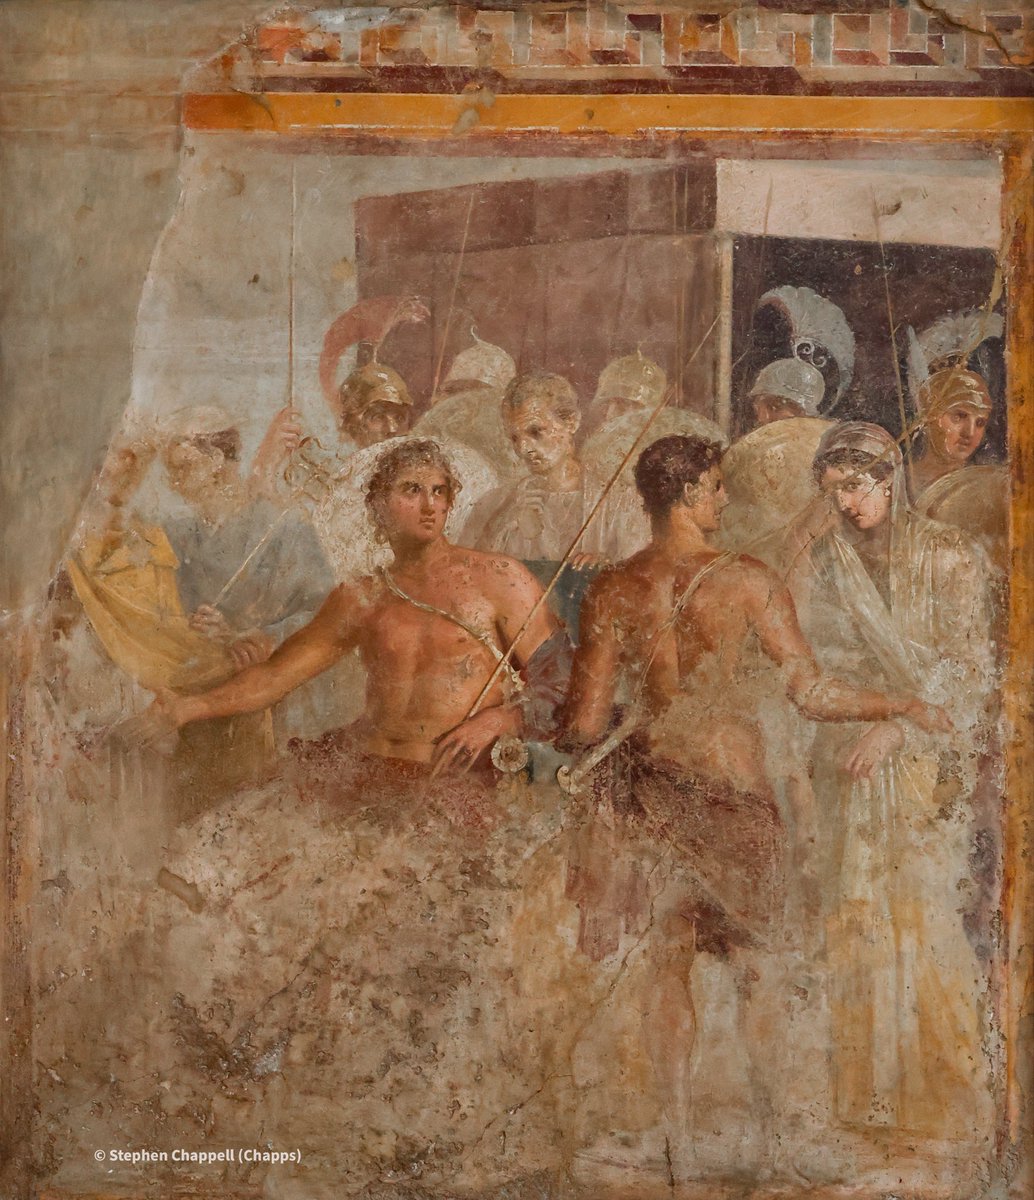 Finally, a high res photo of this incredible fresco, which depicts Achilles surrendering Briseis to Agamemnon (he did not take it well). Much has been lost, but look at the tones of the skin of Achilles - superb! 

House of the Tragic Poet, #Pompeii. 1st c. CE. #MANN 9105.

📸 me